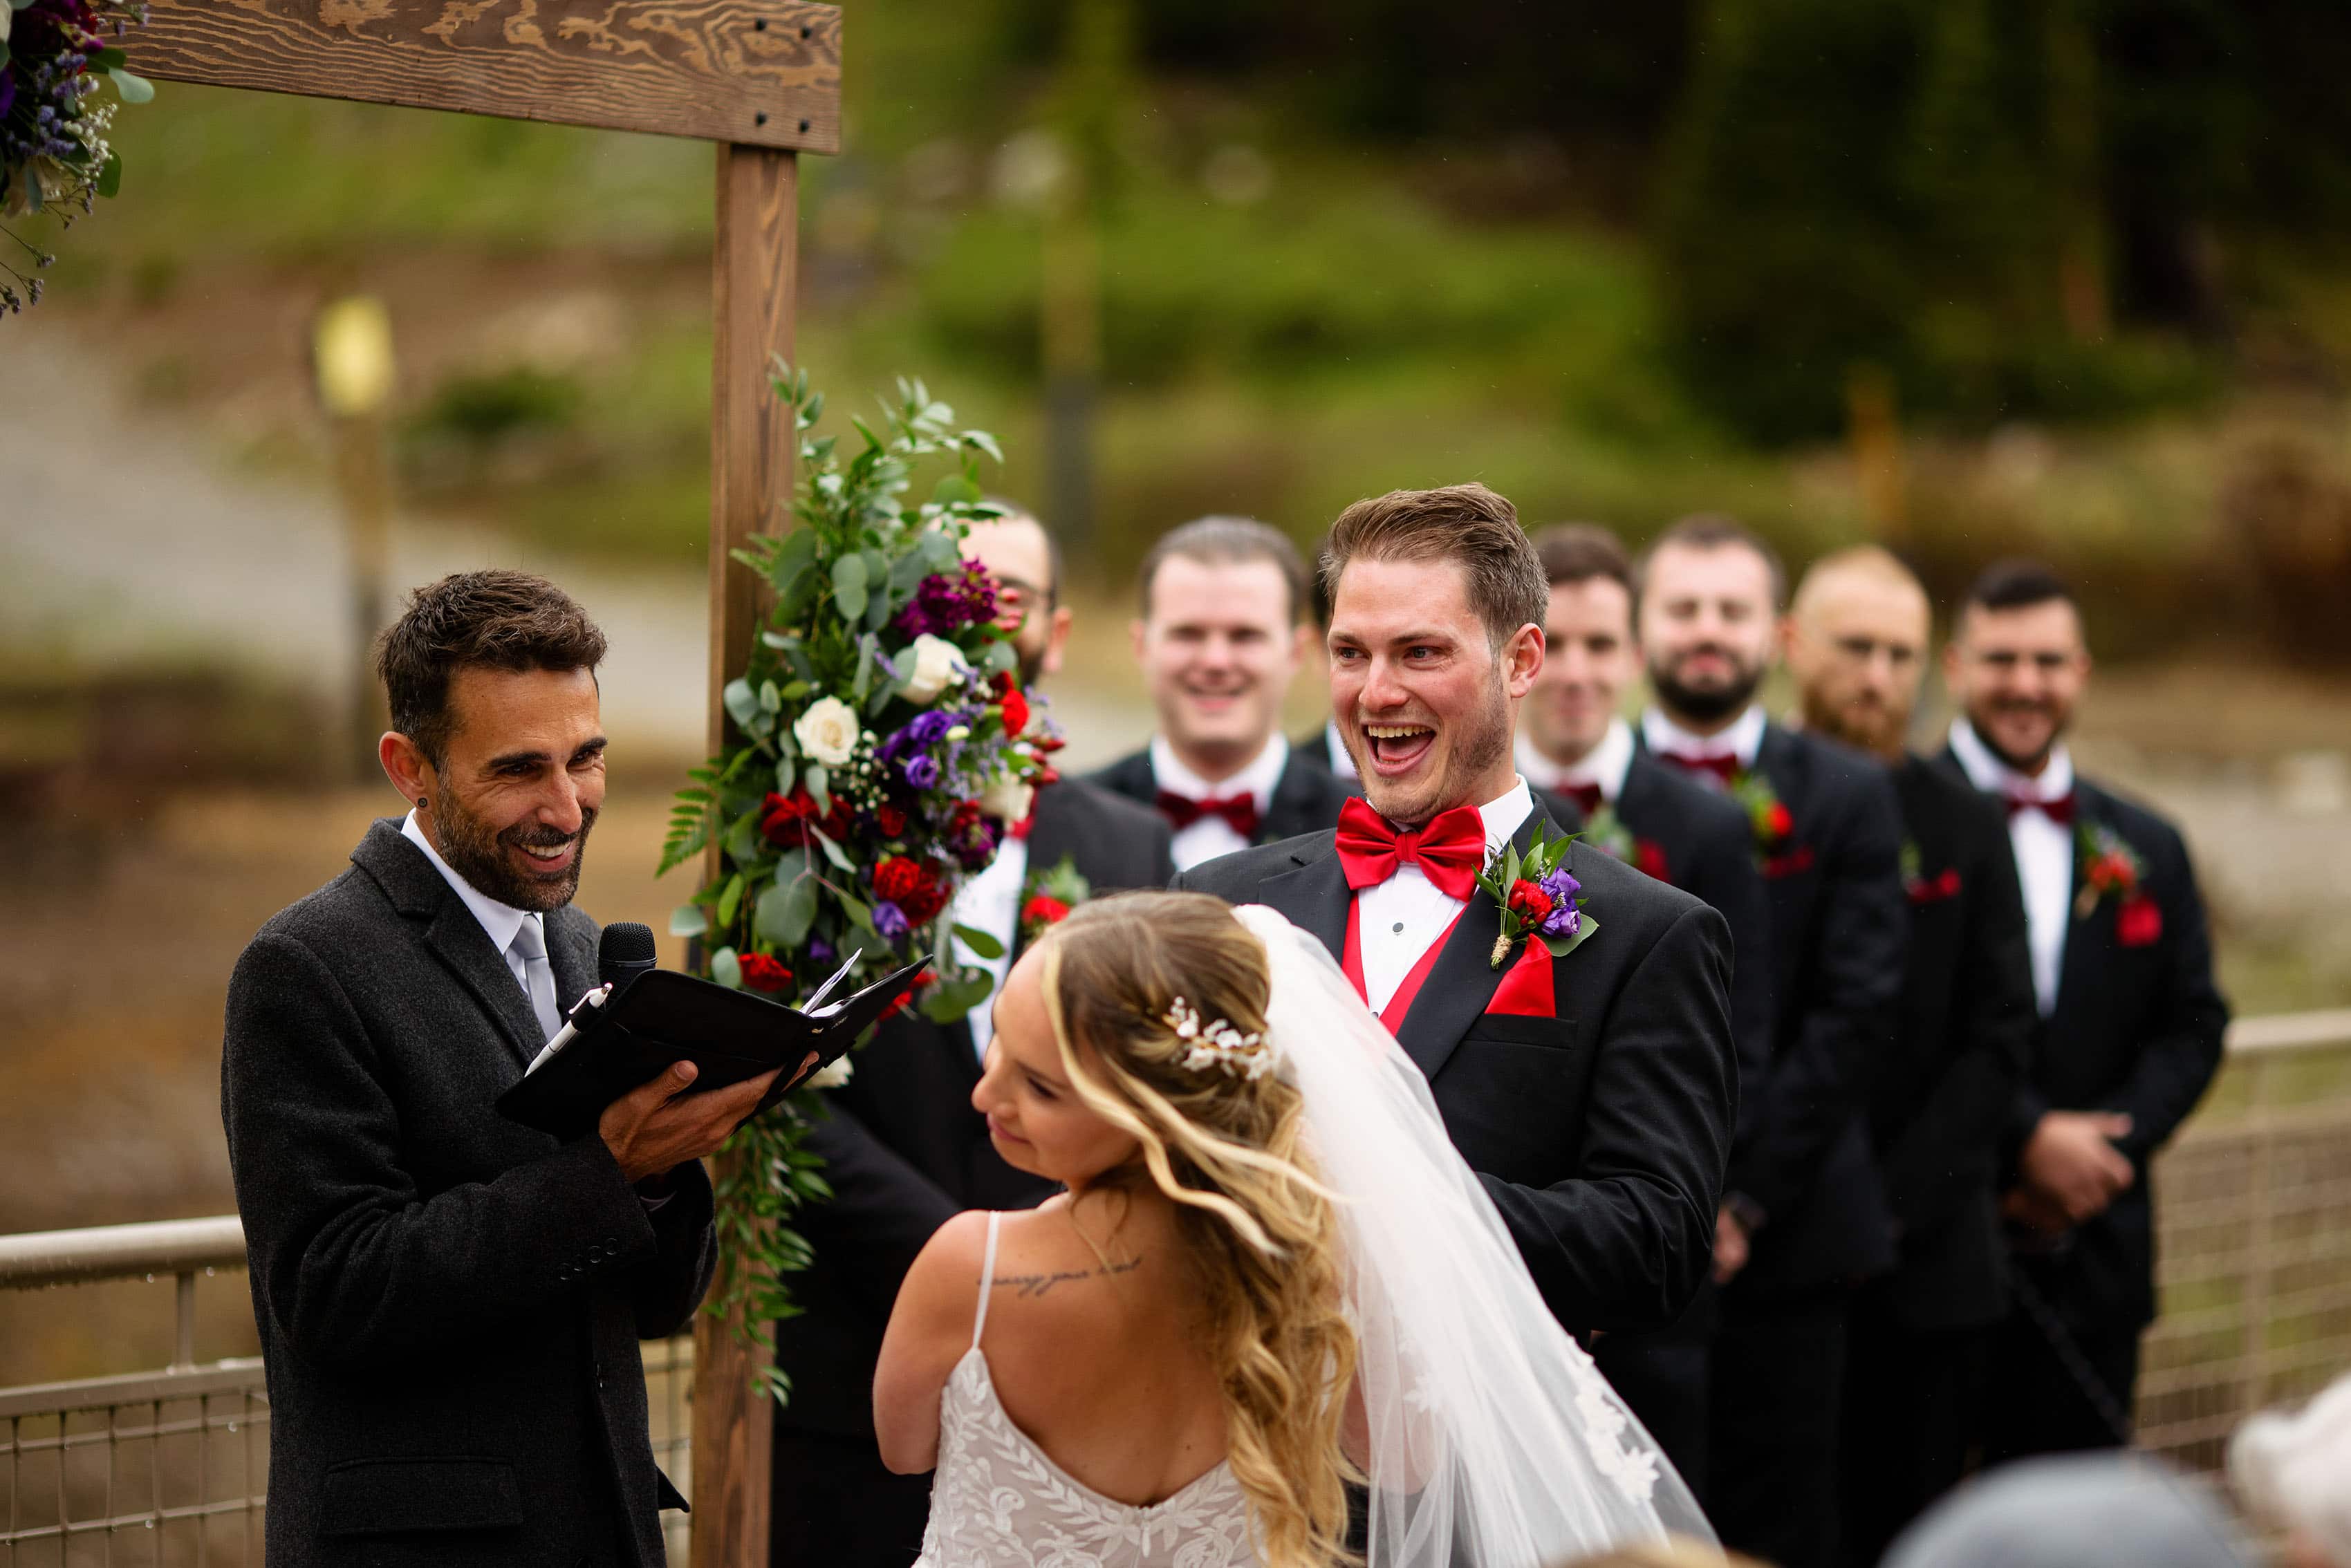 The groom laughs during the wedding ceremony